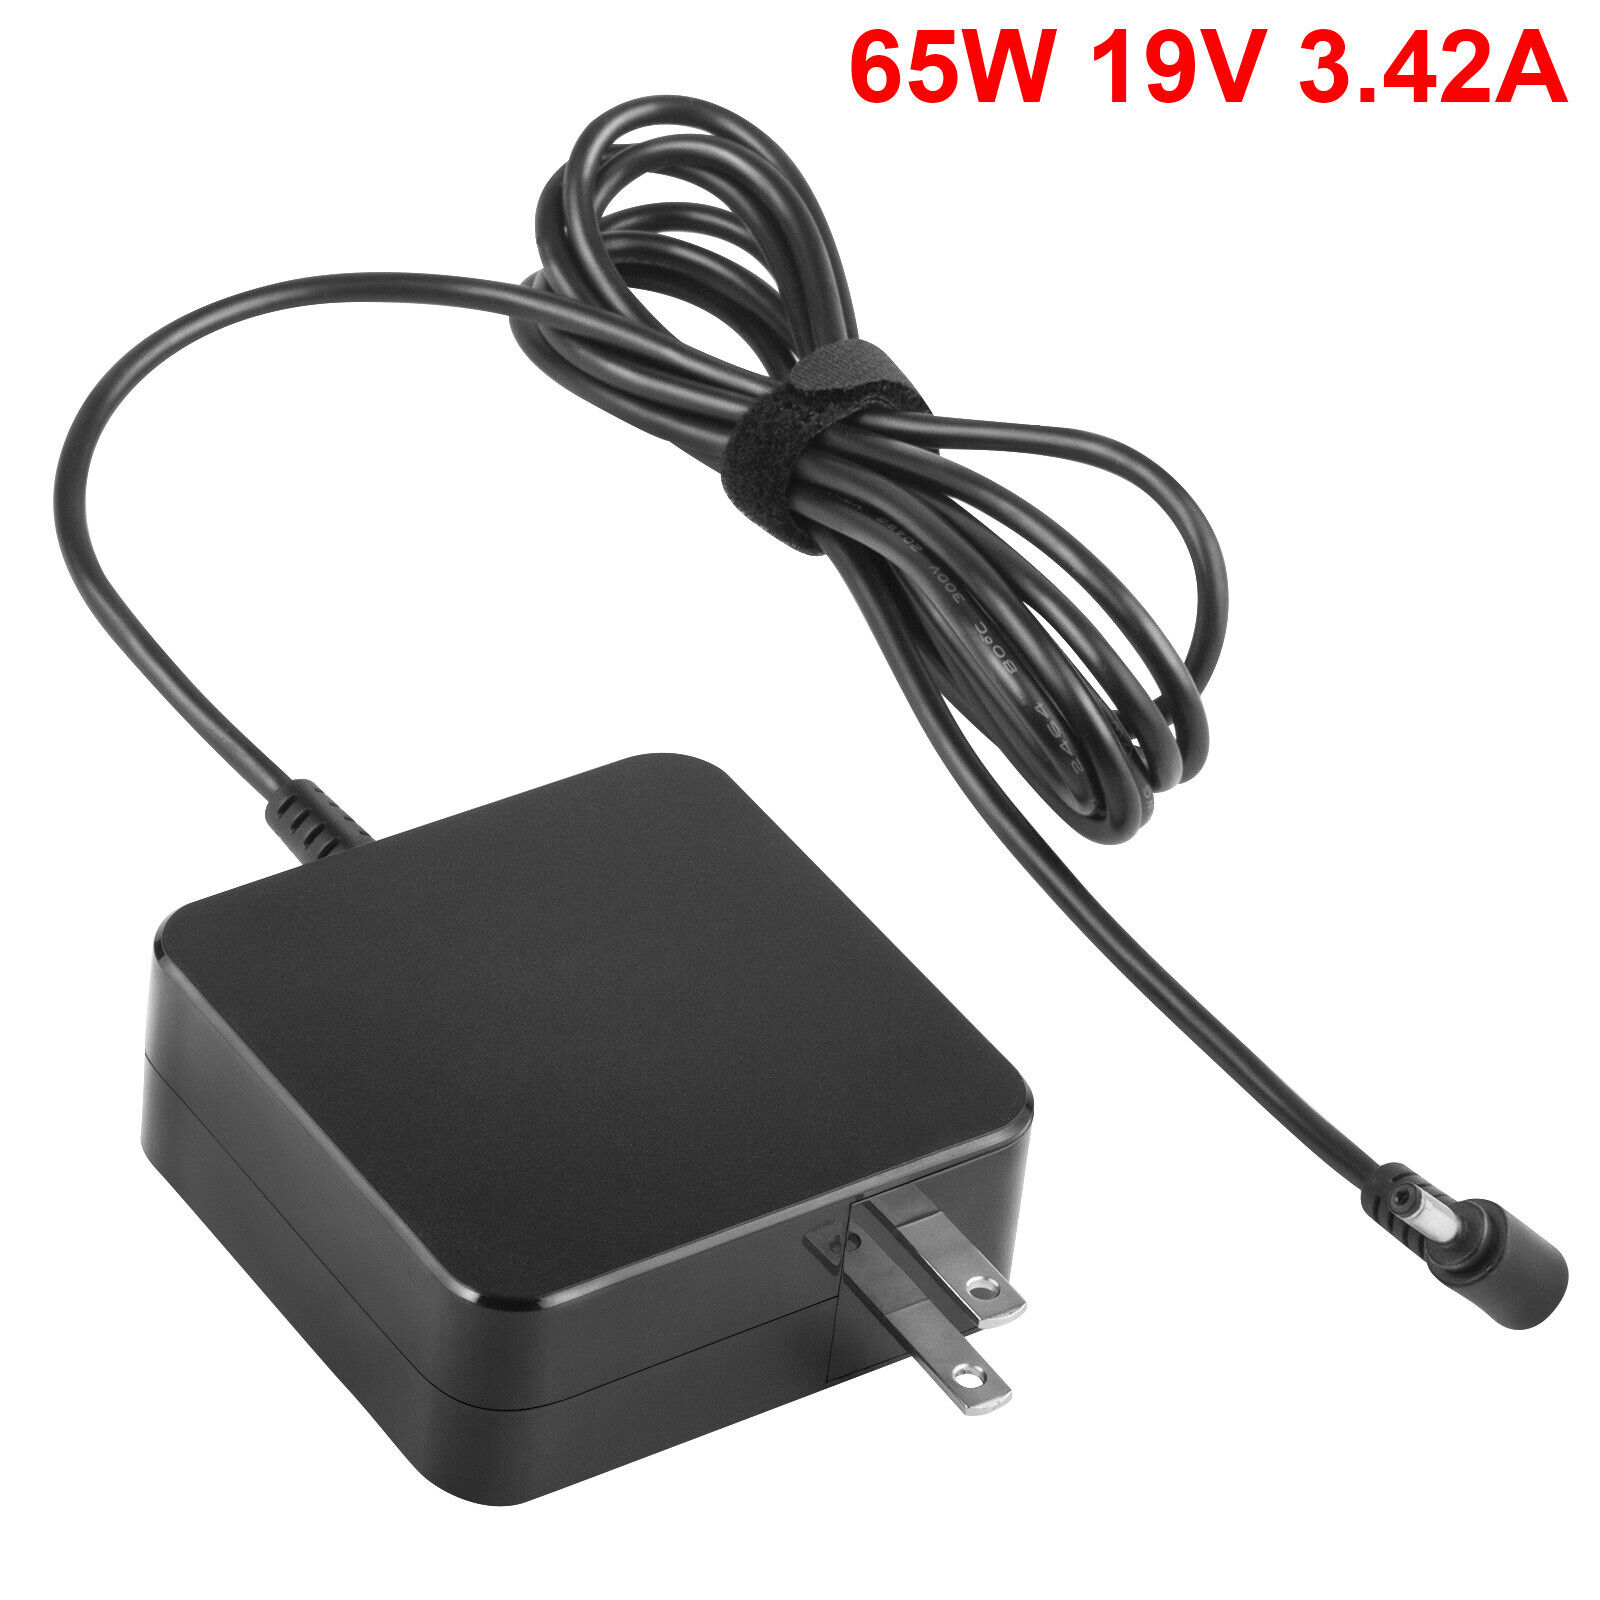 65W 45W 19V Charger Adapter ADP-45DW A AD883J20 for Asus Zenbook Asus Vivobook 